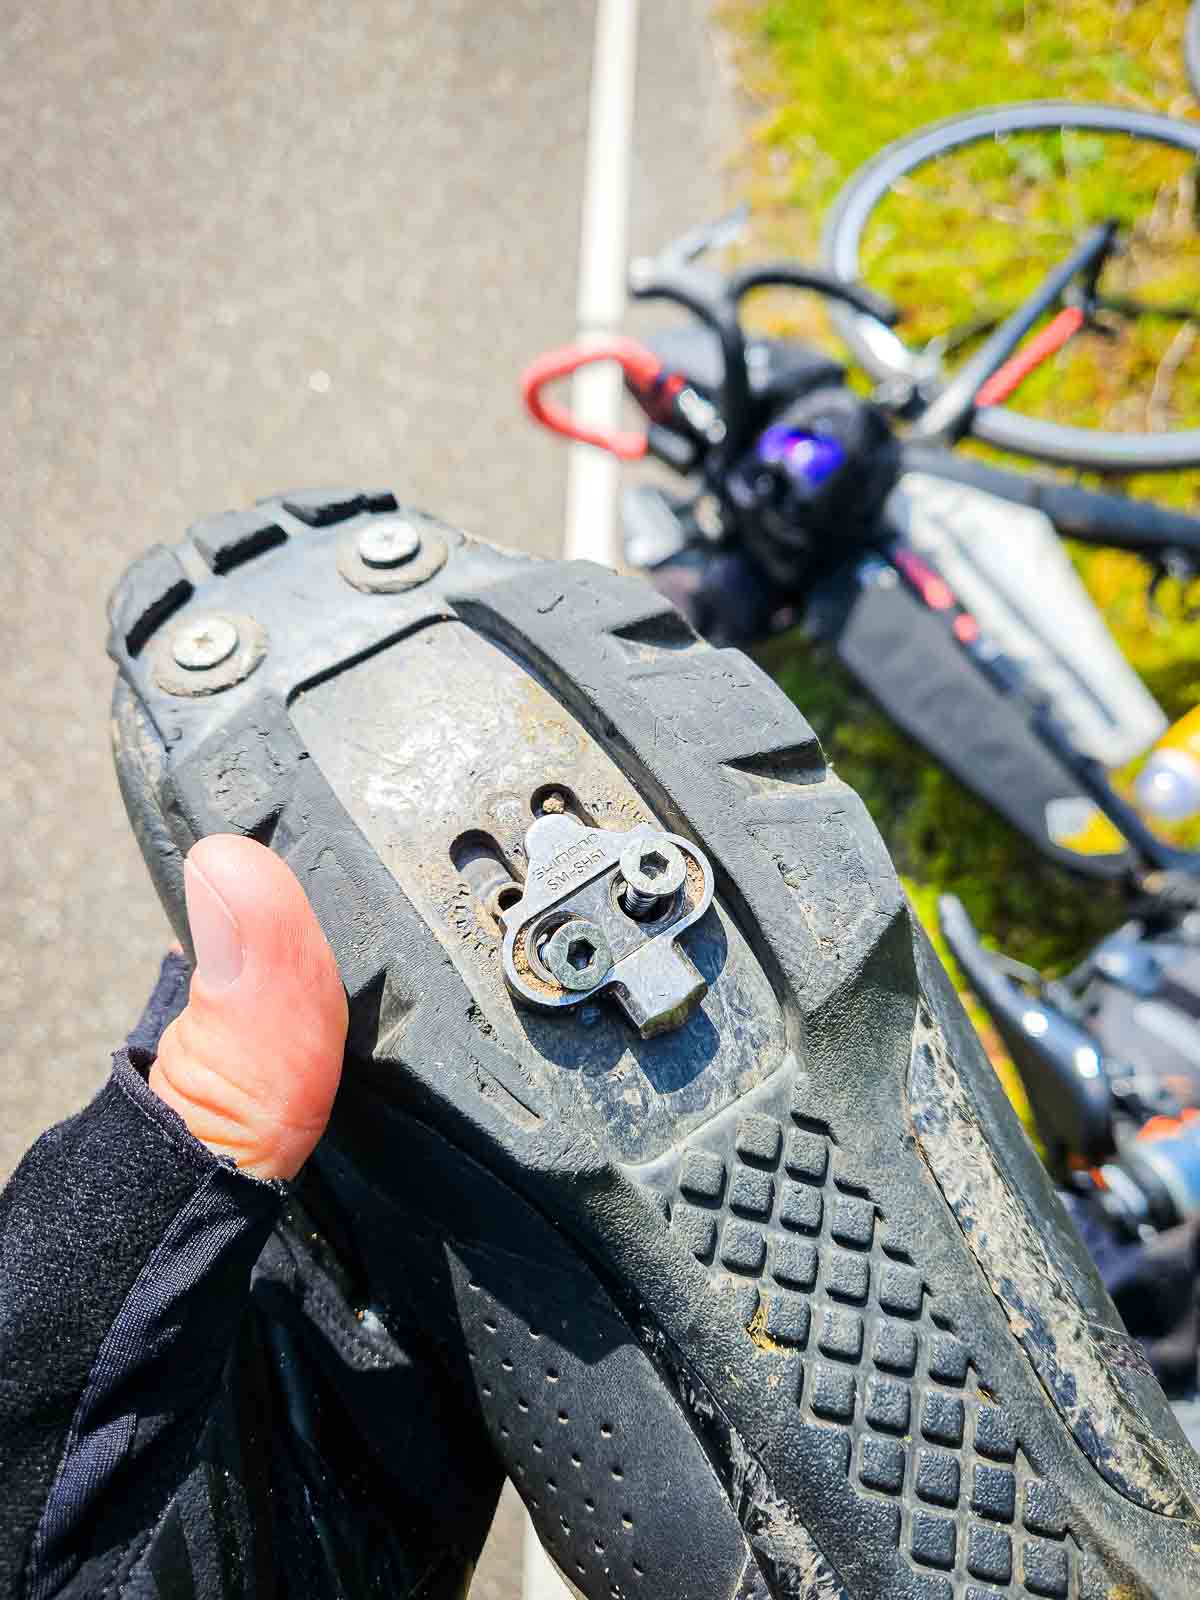 A loose cleat plate with loose screws on a wheel shoe